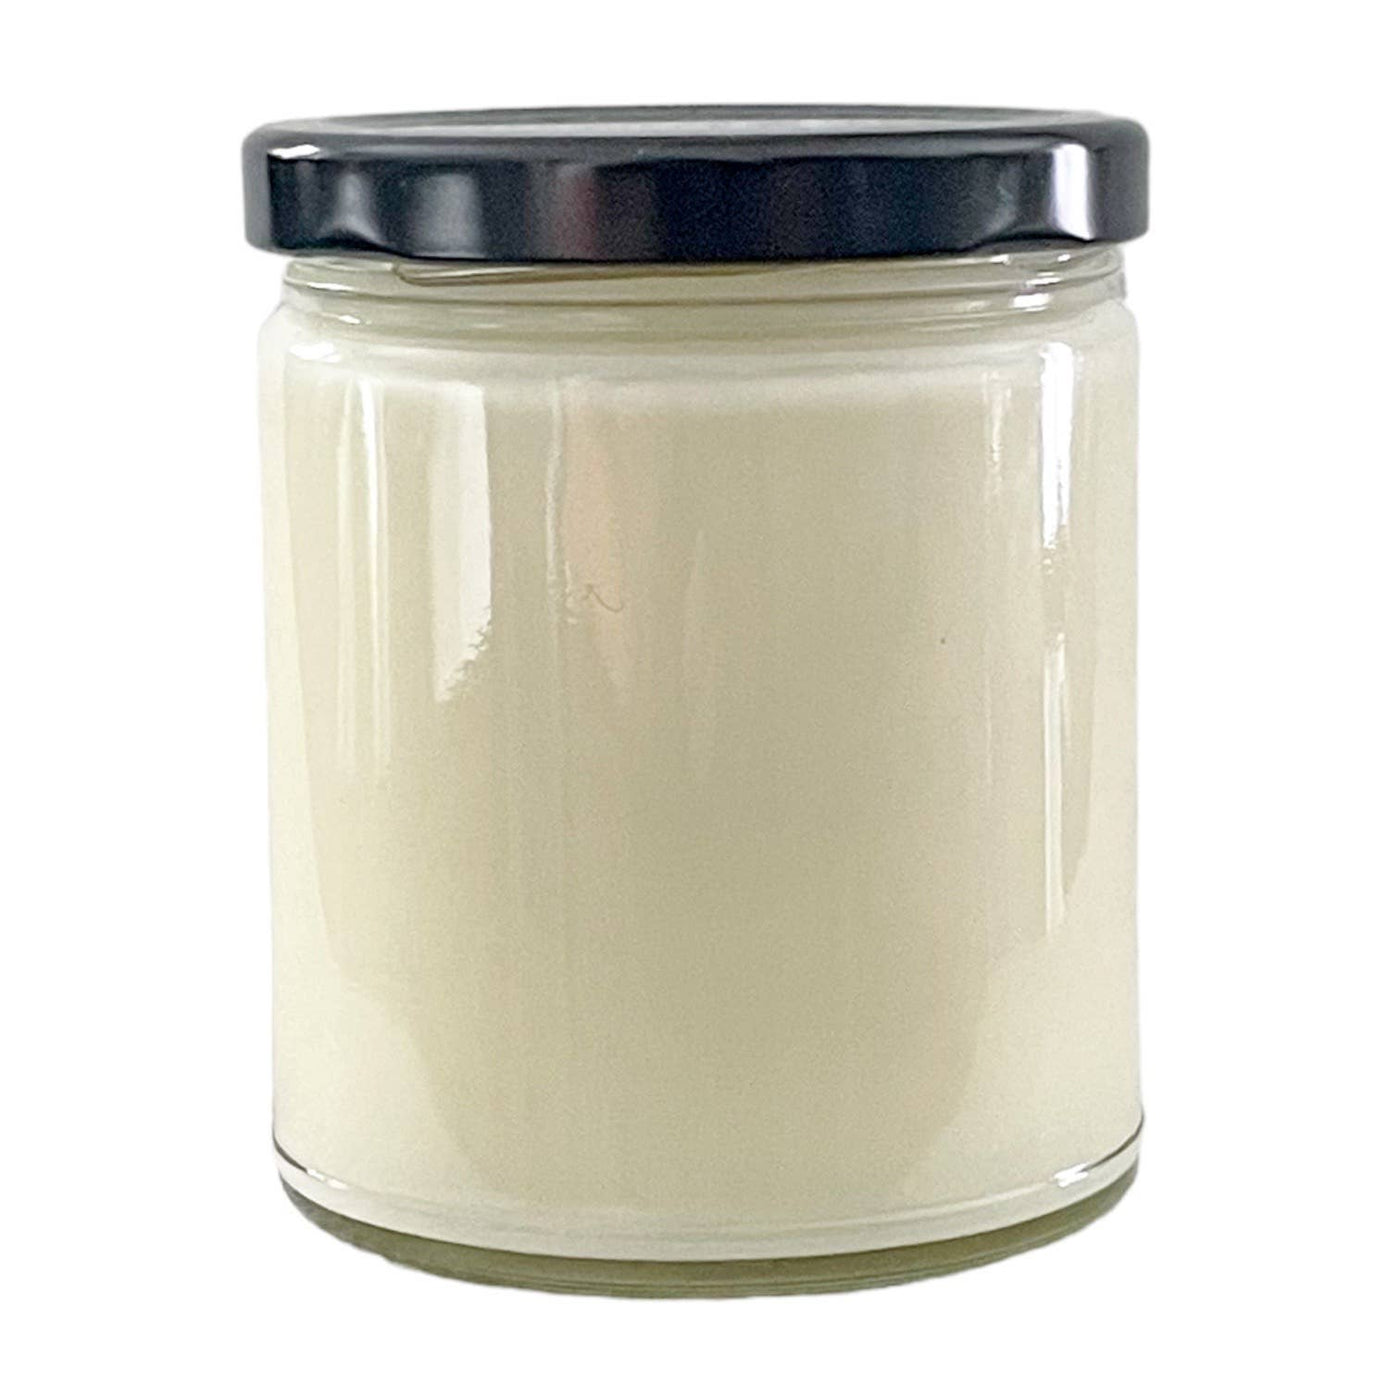 NO LABEL SOY WAX CANDLE - BLACK LID: 8 oz Single Wick / Bloom